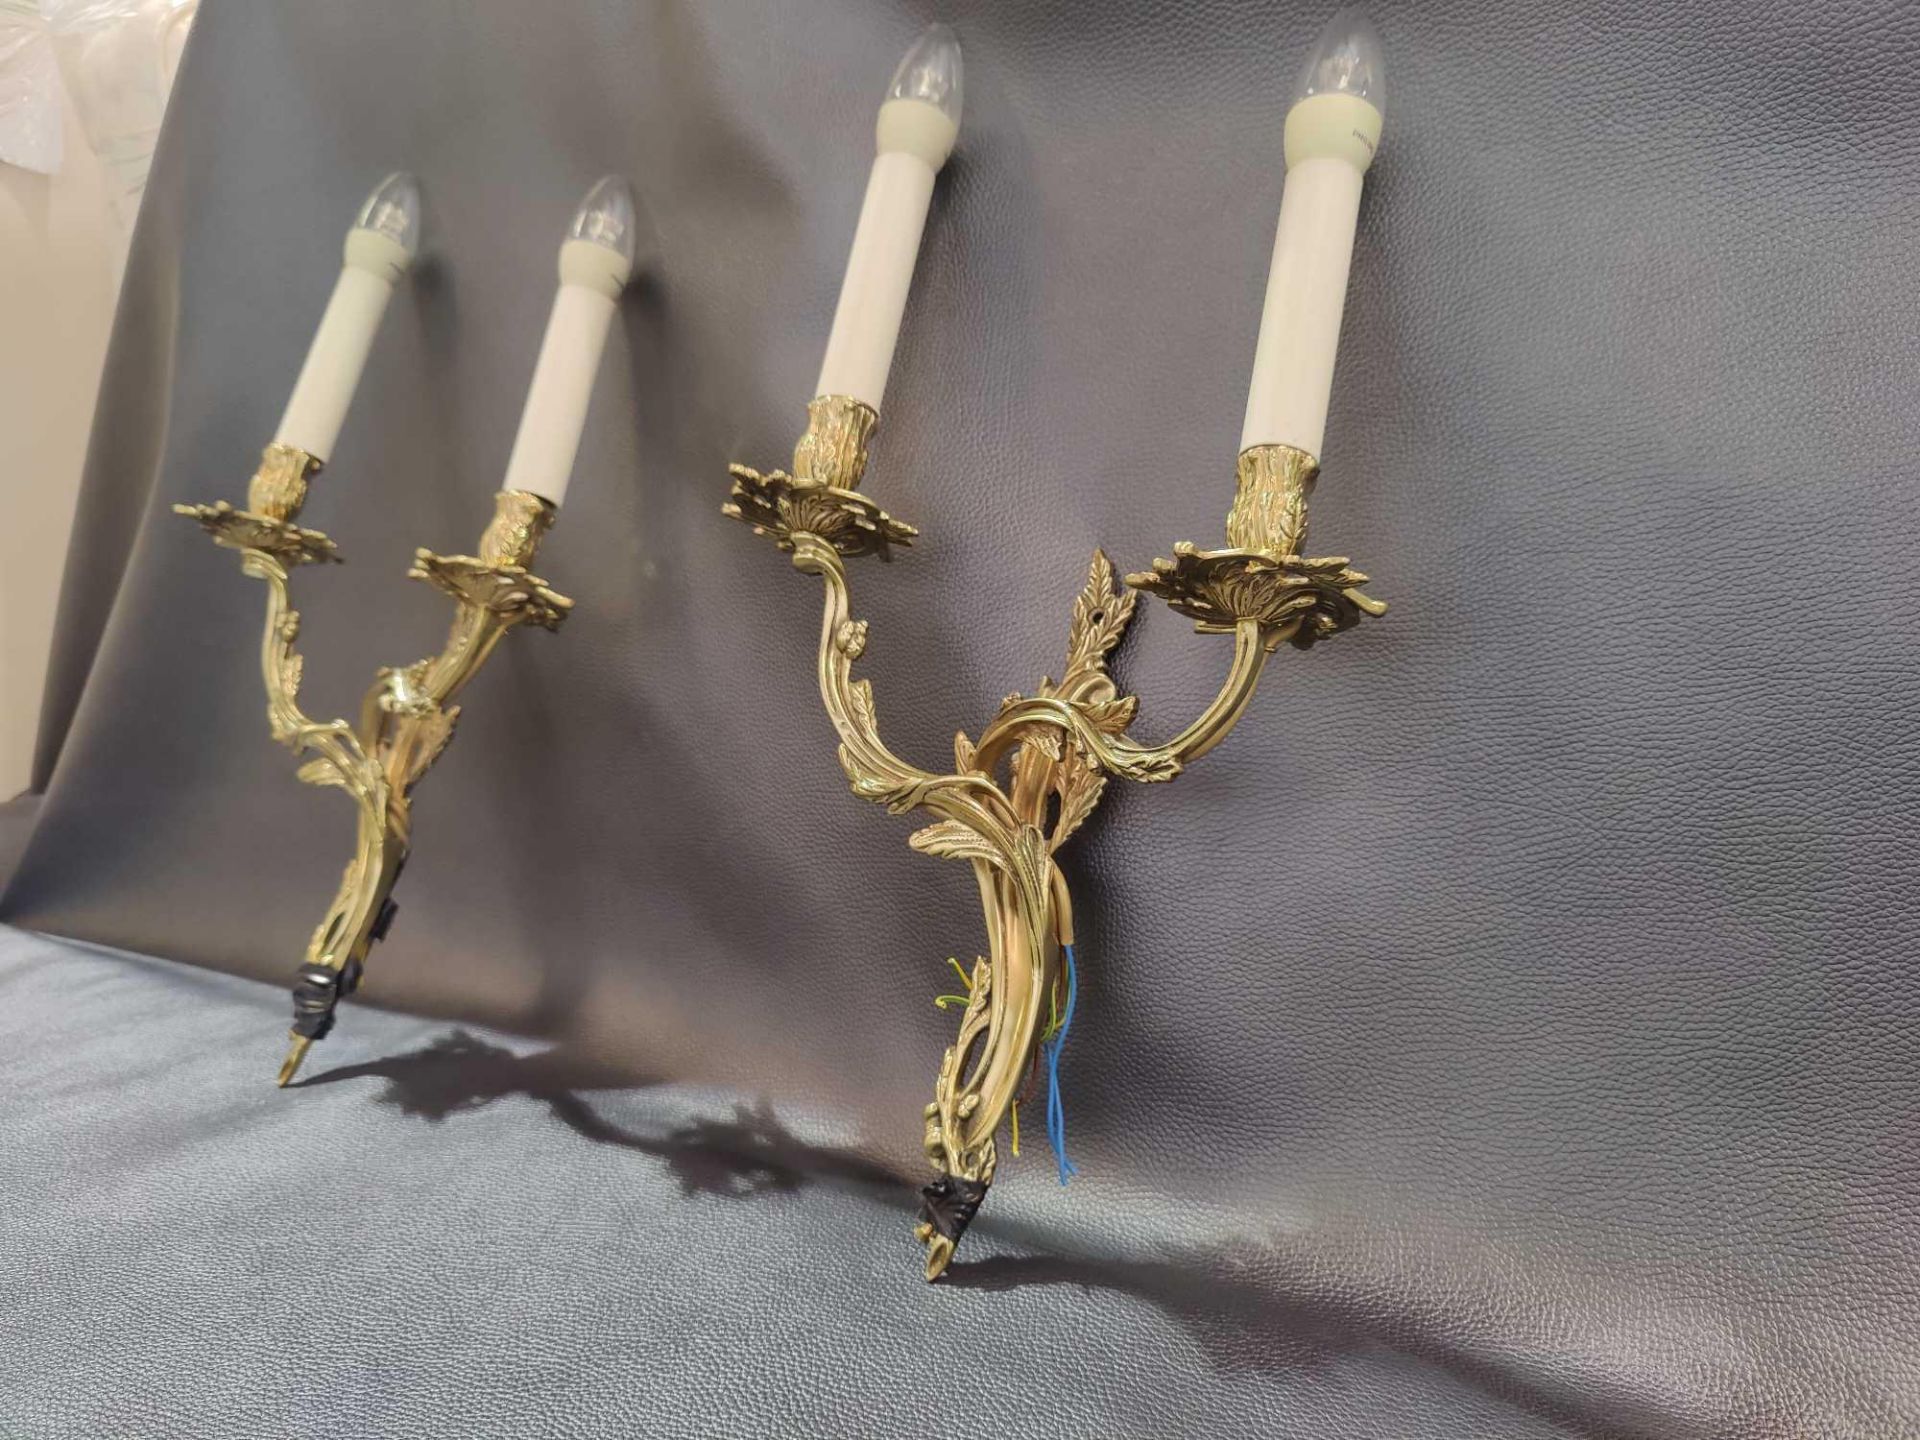 A Pair Of Rococo Style Wall Appliques In Gilt Bronze With Two Candles Agrafe Decor On Which Are - Image 2 of 3